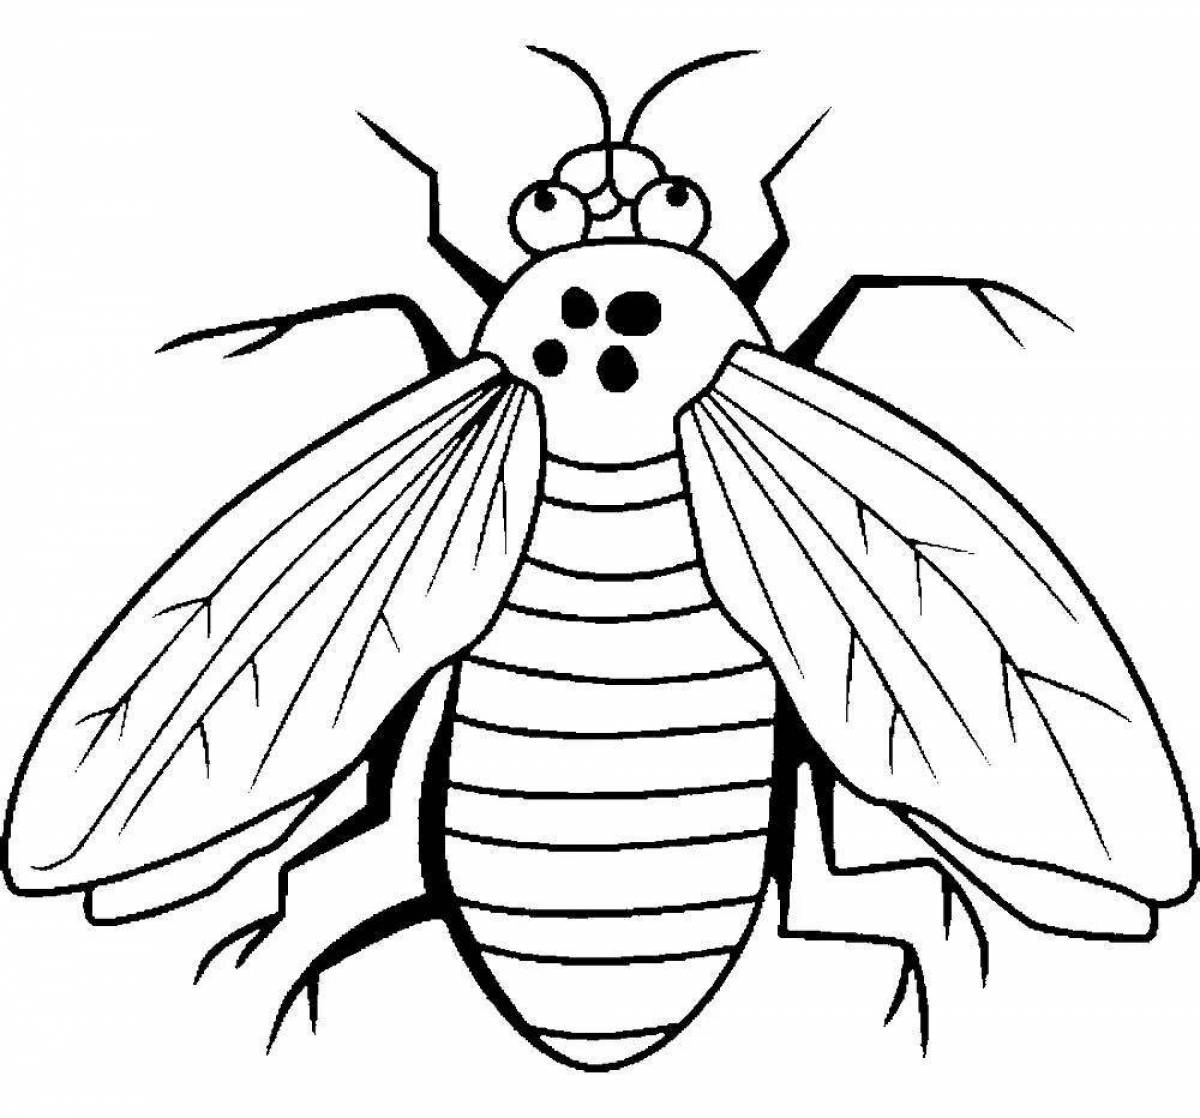 Intriguing fly coloring book for 3-4 year olds